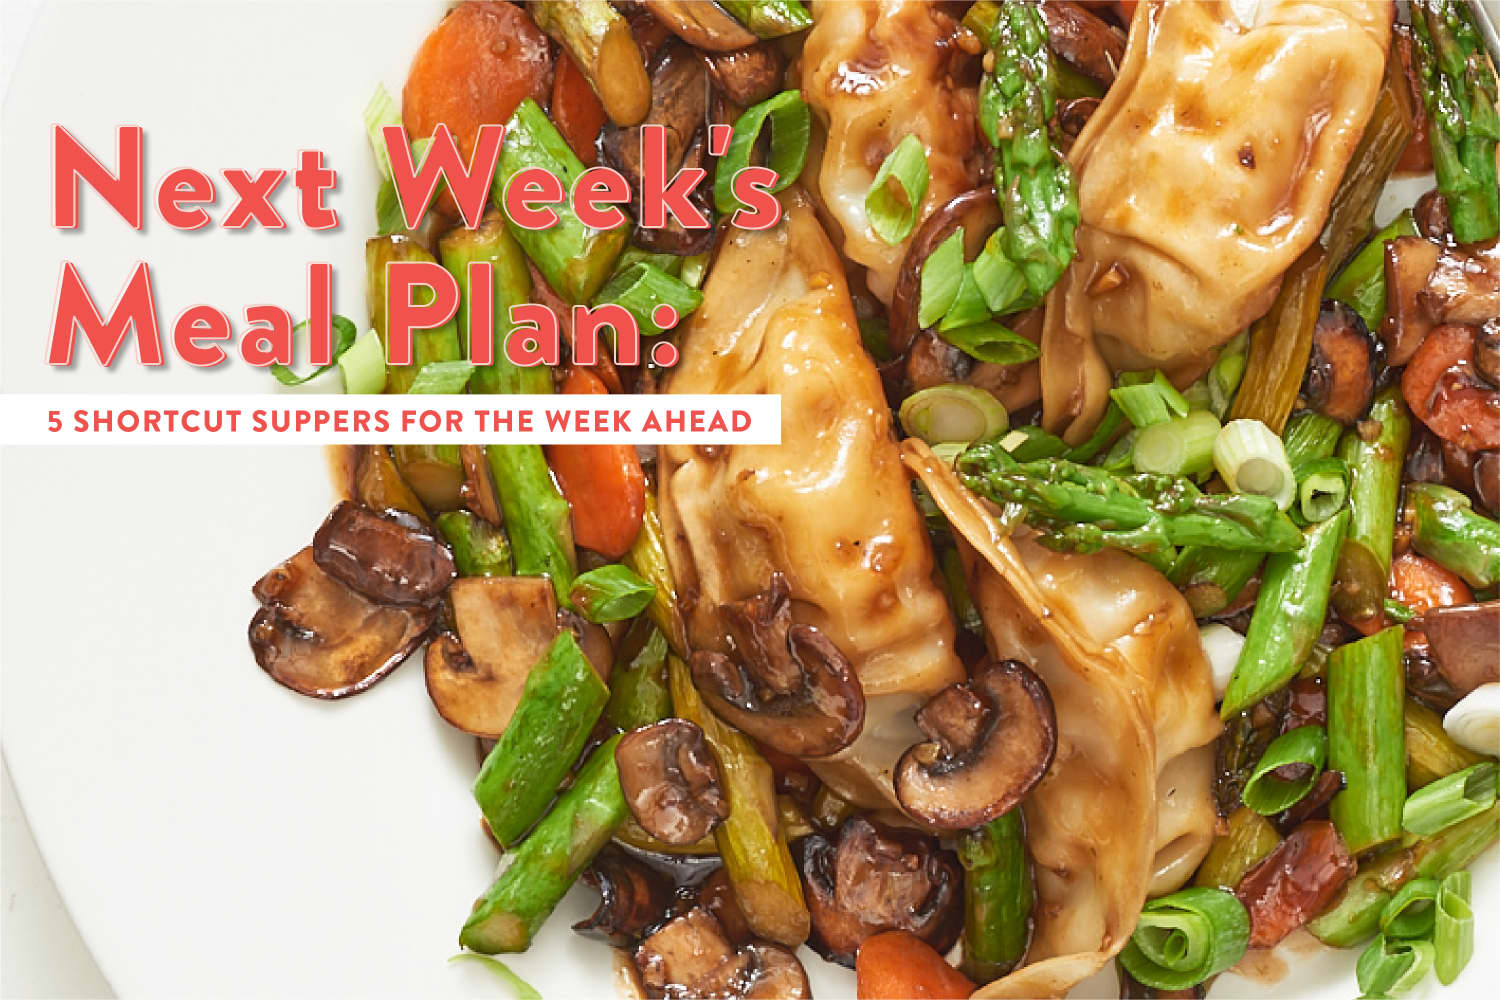 Next Week’s Meal Plan: 5 Shortcut Suppers for the Week Ahead